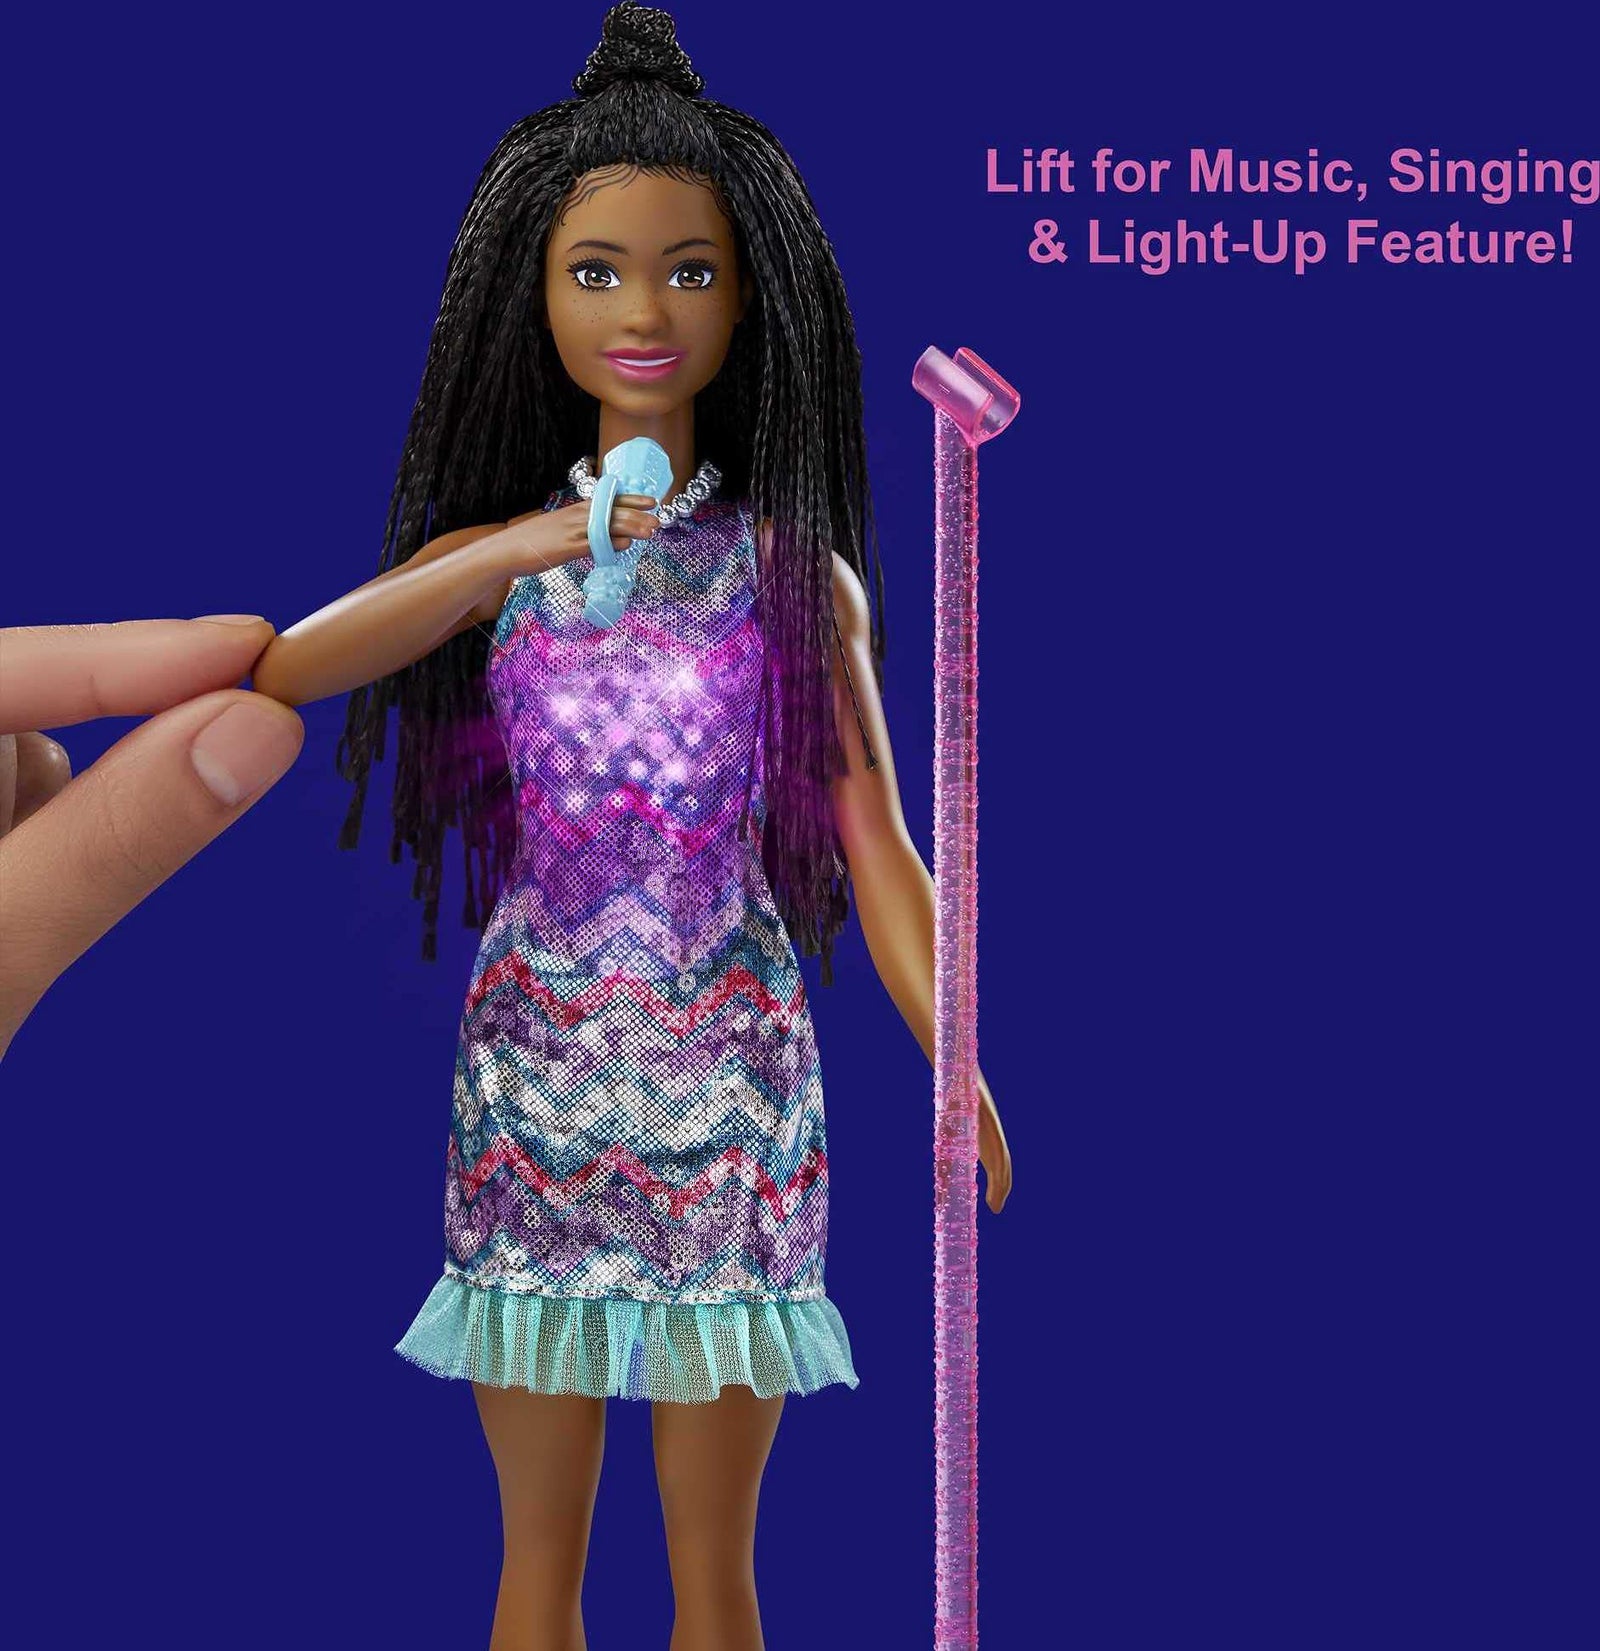 Barbie: Big City, Big Dreams Singing Brooklyn” Roberts Doll (11.5-in Brunette with Braids) with Music, Light-Up Feature, Microphone & Accessories, Gift for 3 to 7 Year Olds